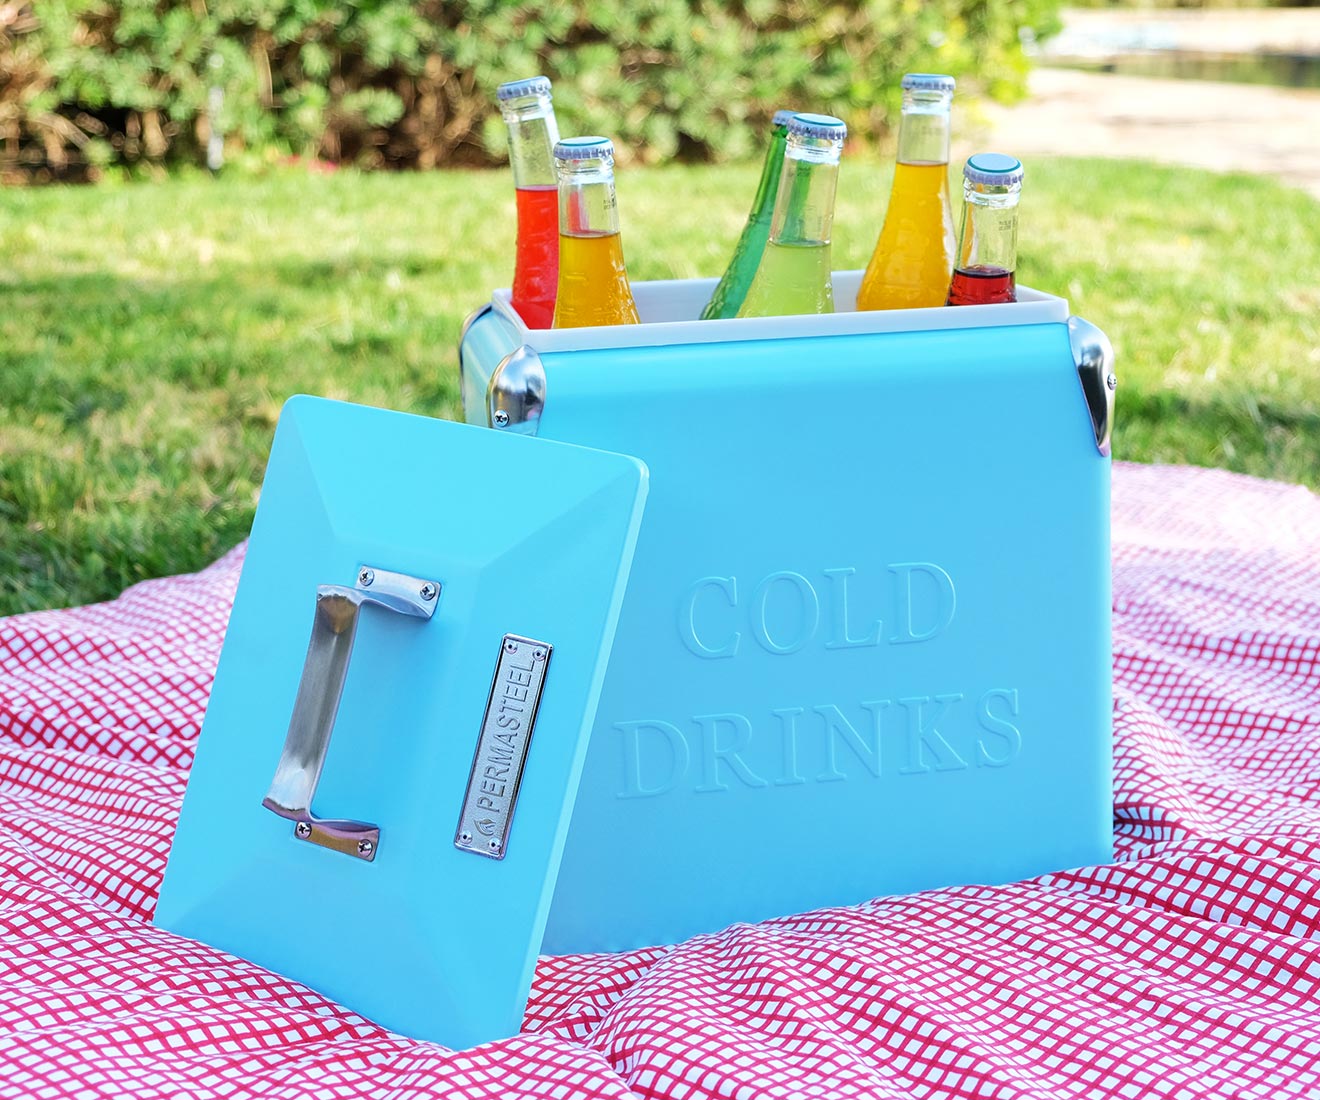 Permasteel 14-Quart Small Picnic Personal Cooler in Turquoise in Picnic Area Setting